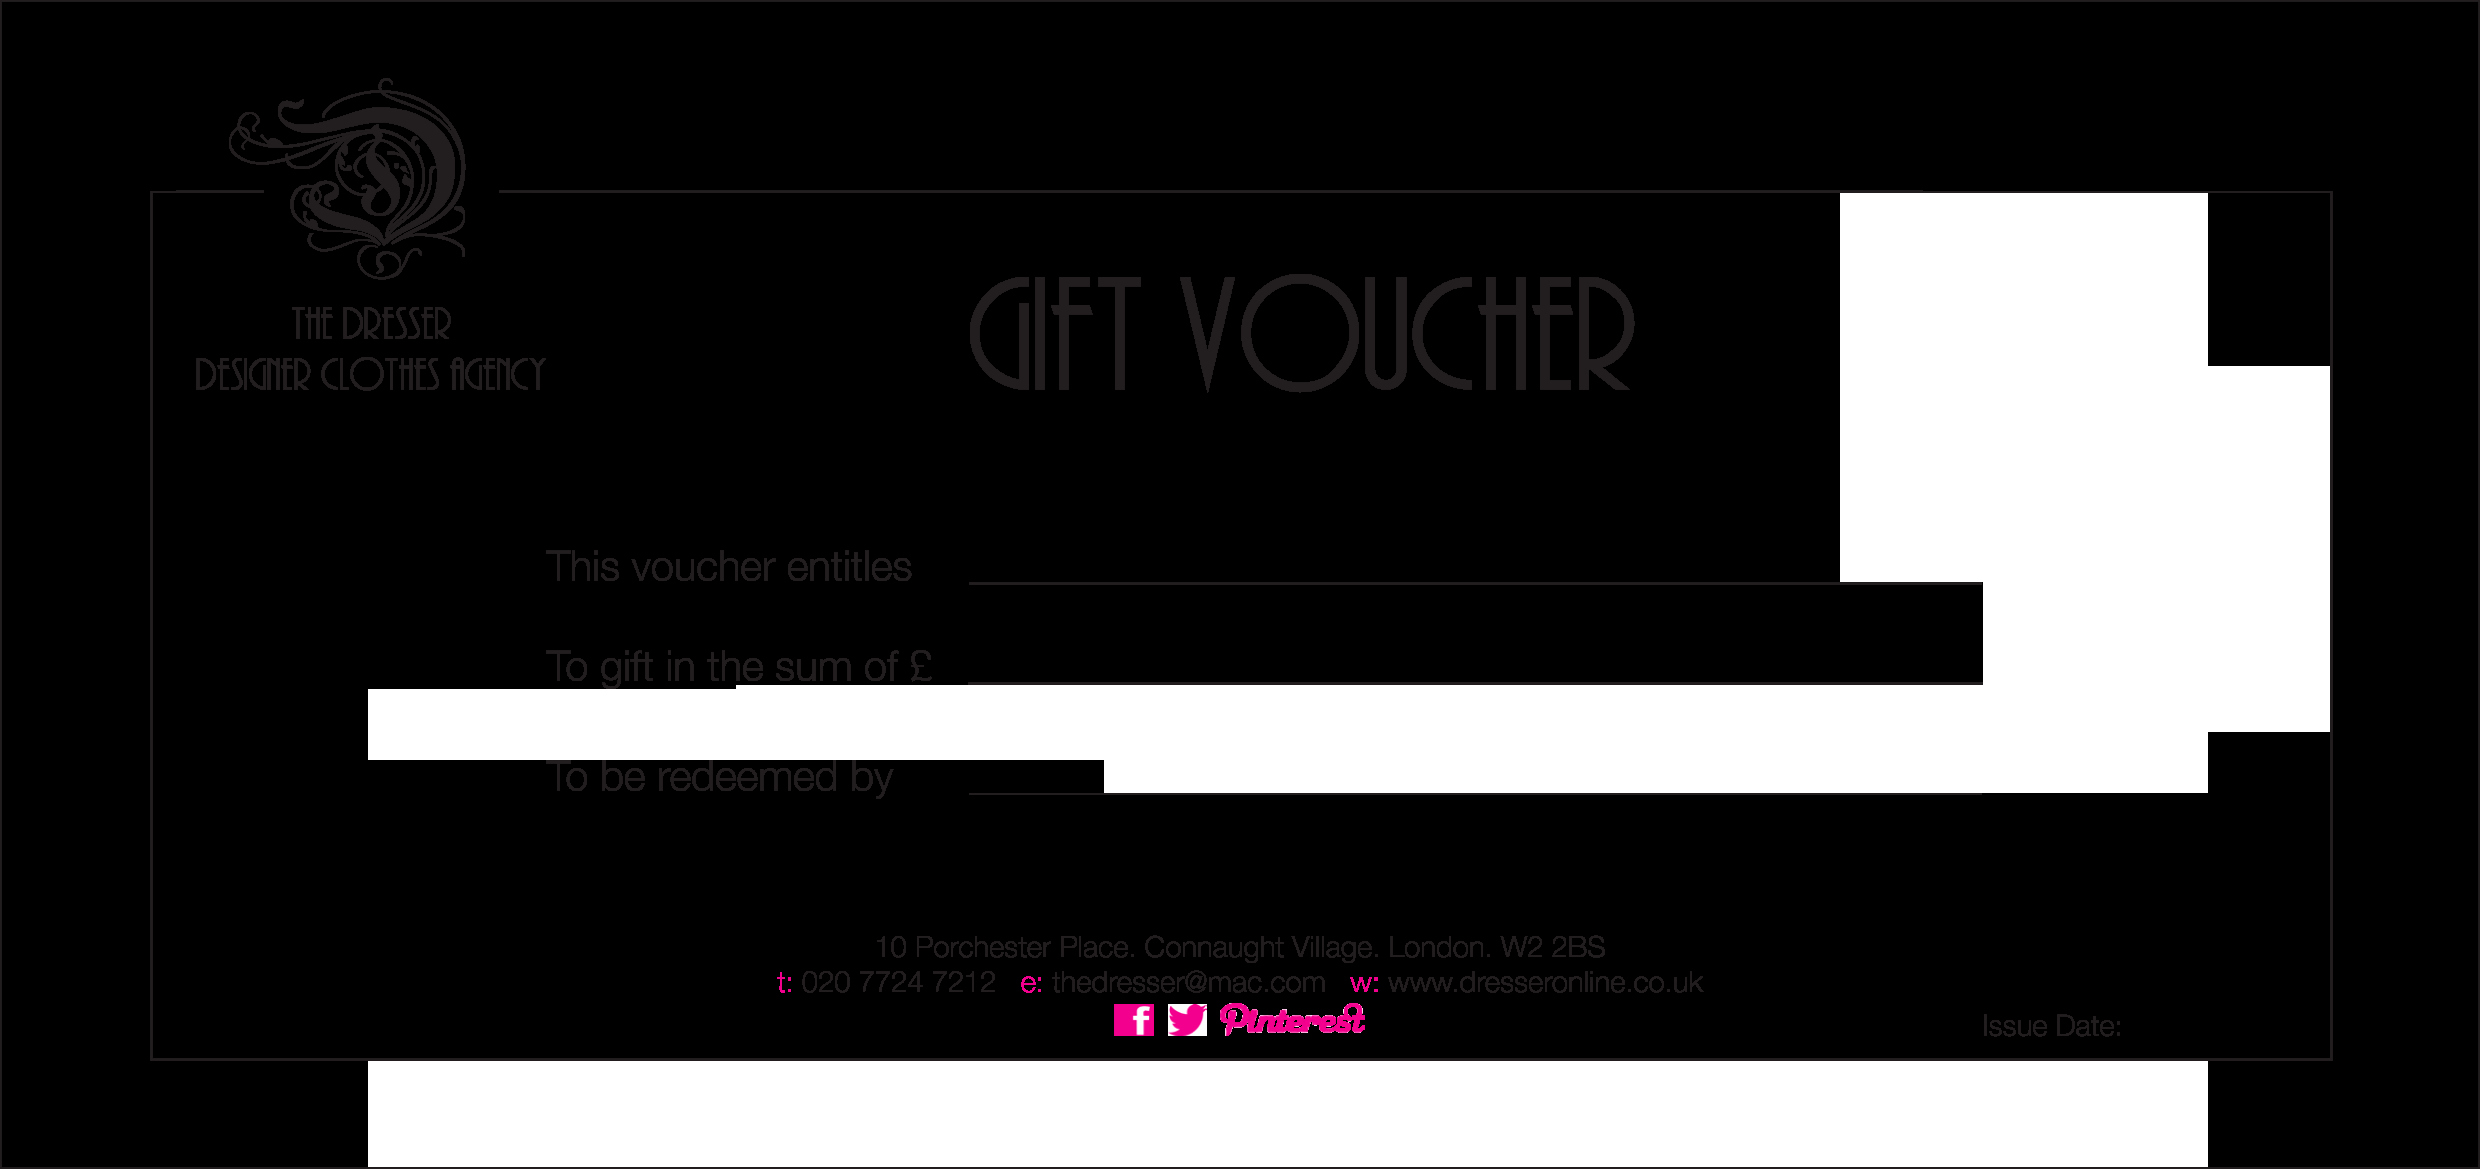 Free Downloadable Templates for Word Unique Gift Voucher Template Word Free Download